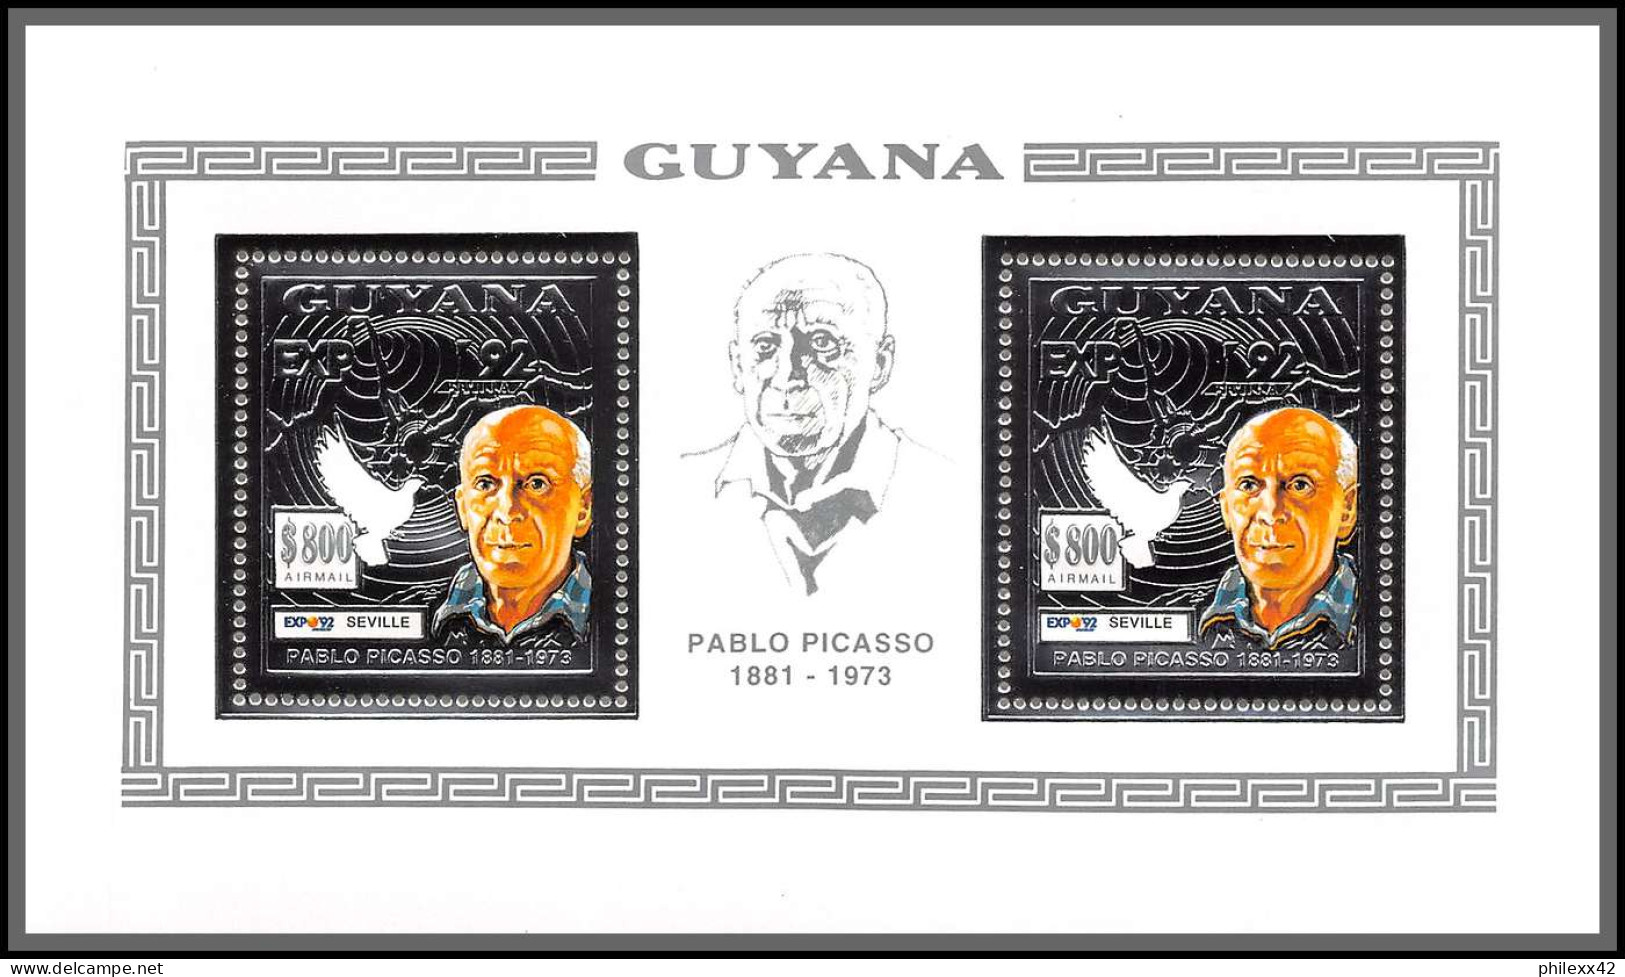 86352 Guyana Mi 3988 A Paire Pablo PICASSO Expo Seville 92 Argent Silver Tableau Painting DOVE ** MNH  - Picasso